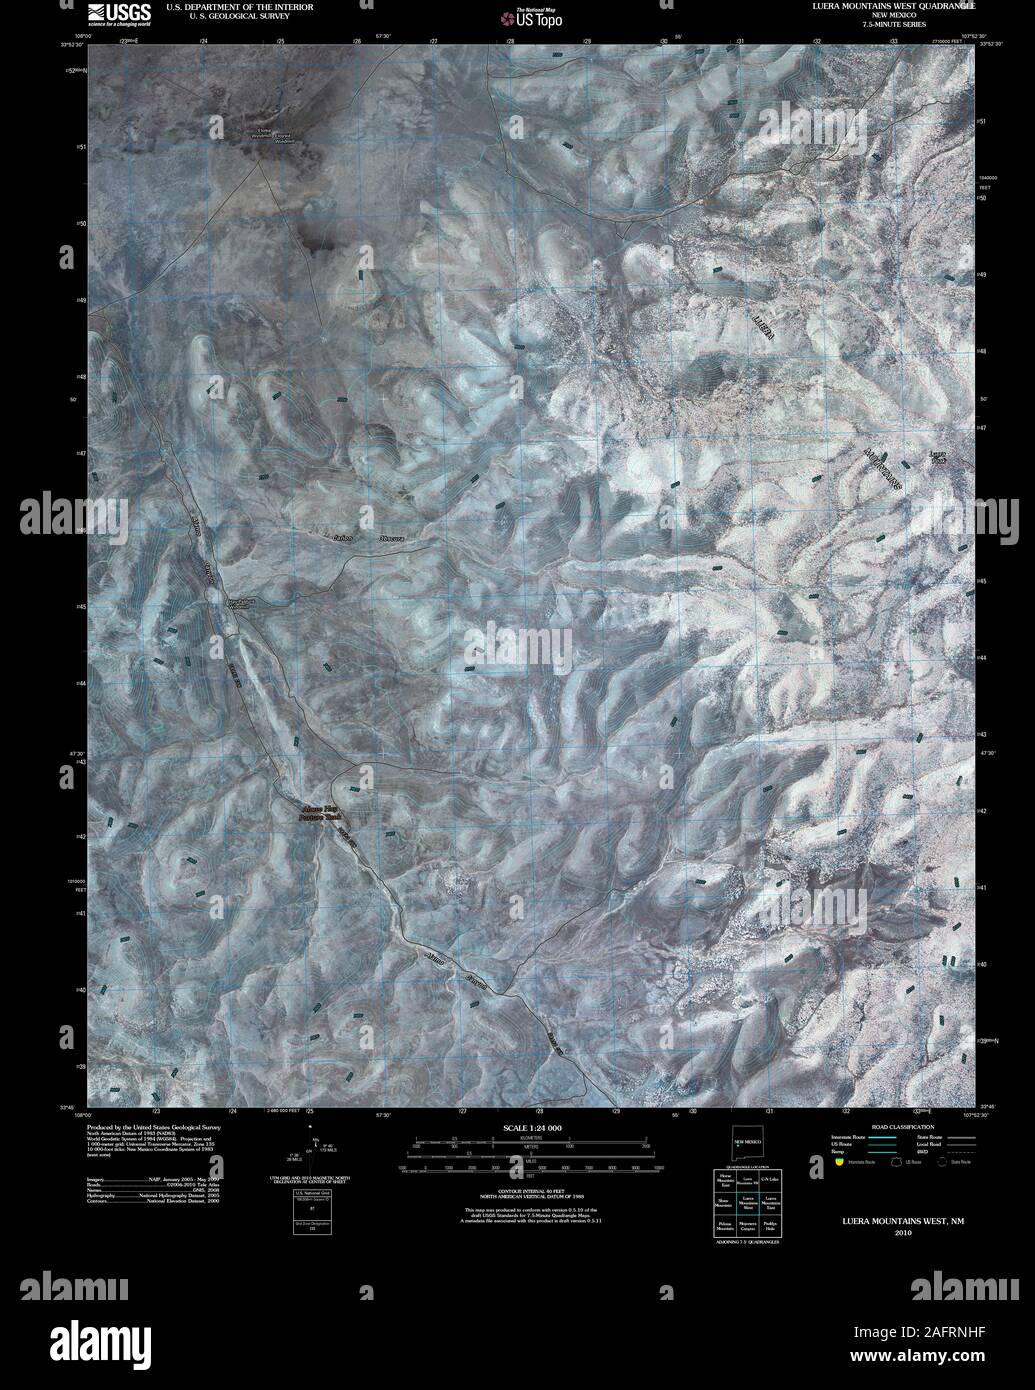 USGS TOPO Map New Mexico NM Luera Mountains West 20100826 TM Inverted Restoration Stock Photo